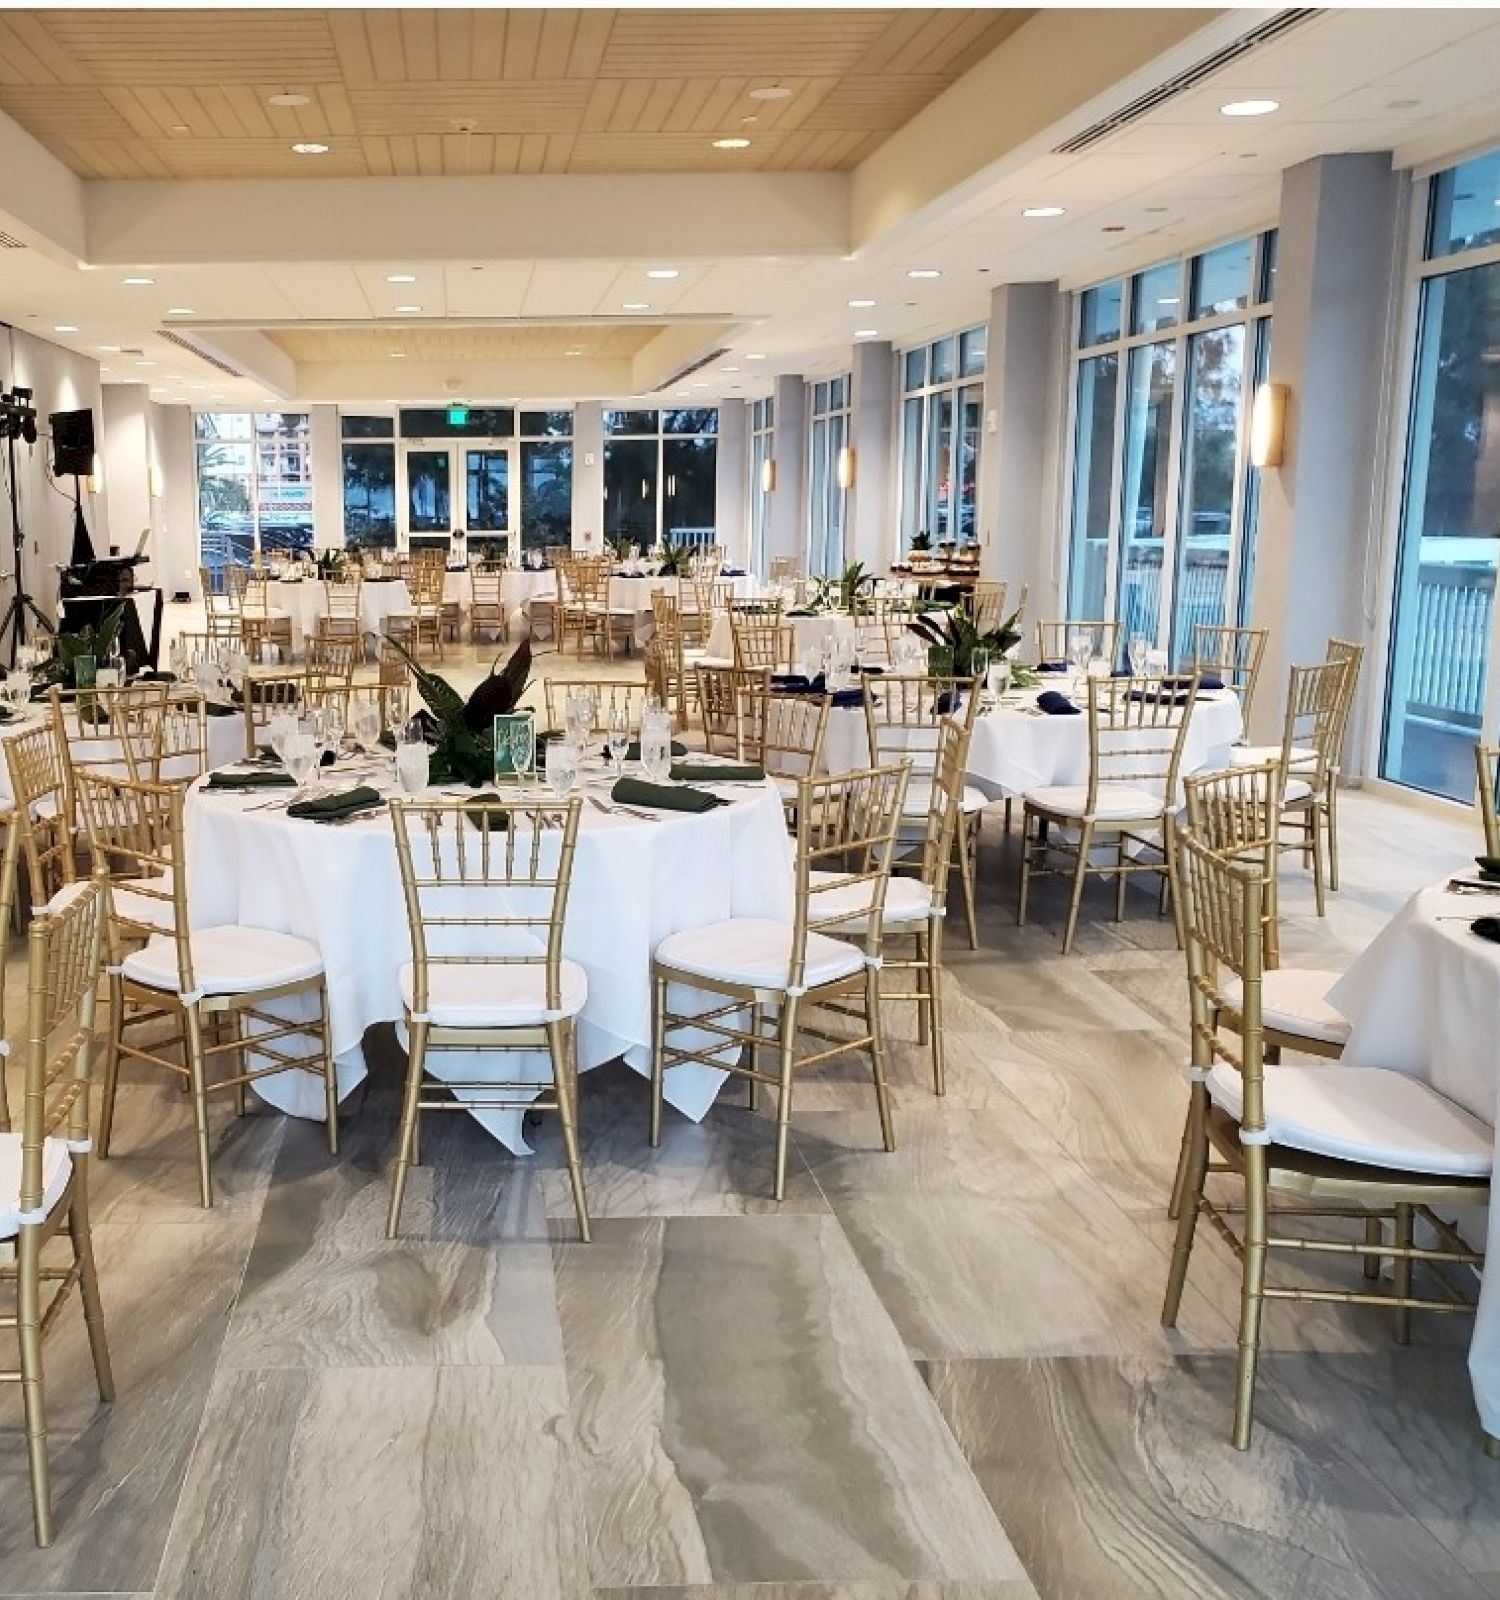 A spacious banquet hall is set up with round tables, white tablecloths, gold chairs, and decorative centerpieces, ready for an event.